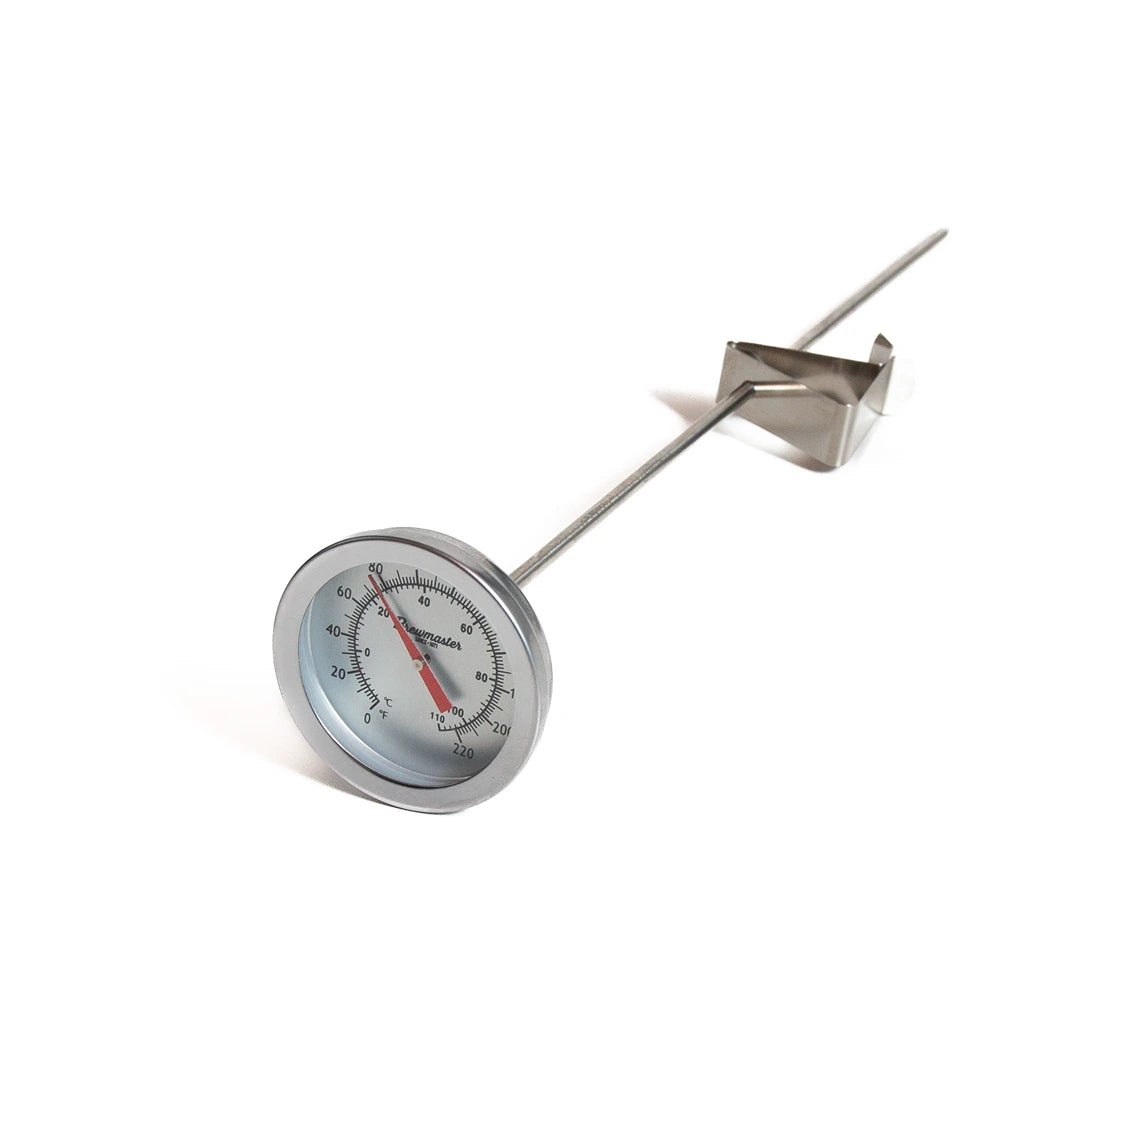 1pc Kettle Wine Thermometer Clip on Dial Thermometer Home Brew Wine Bierhermometer